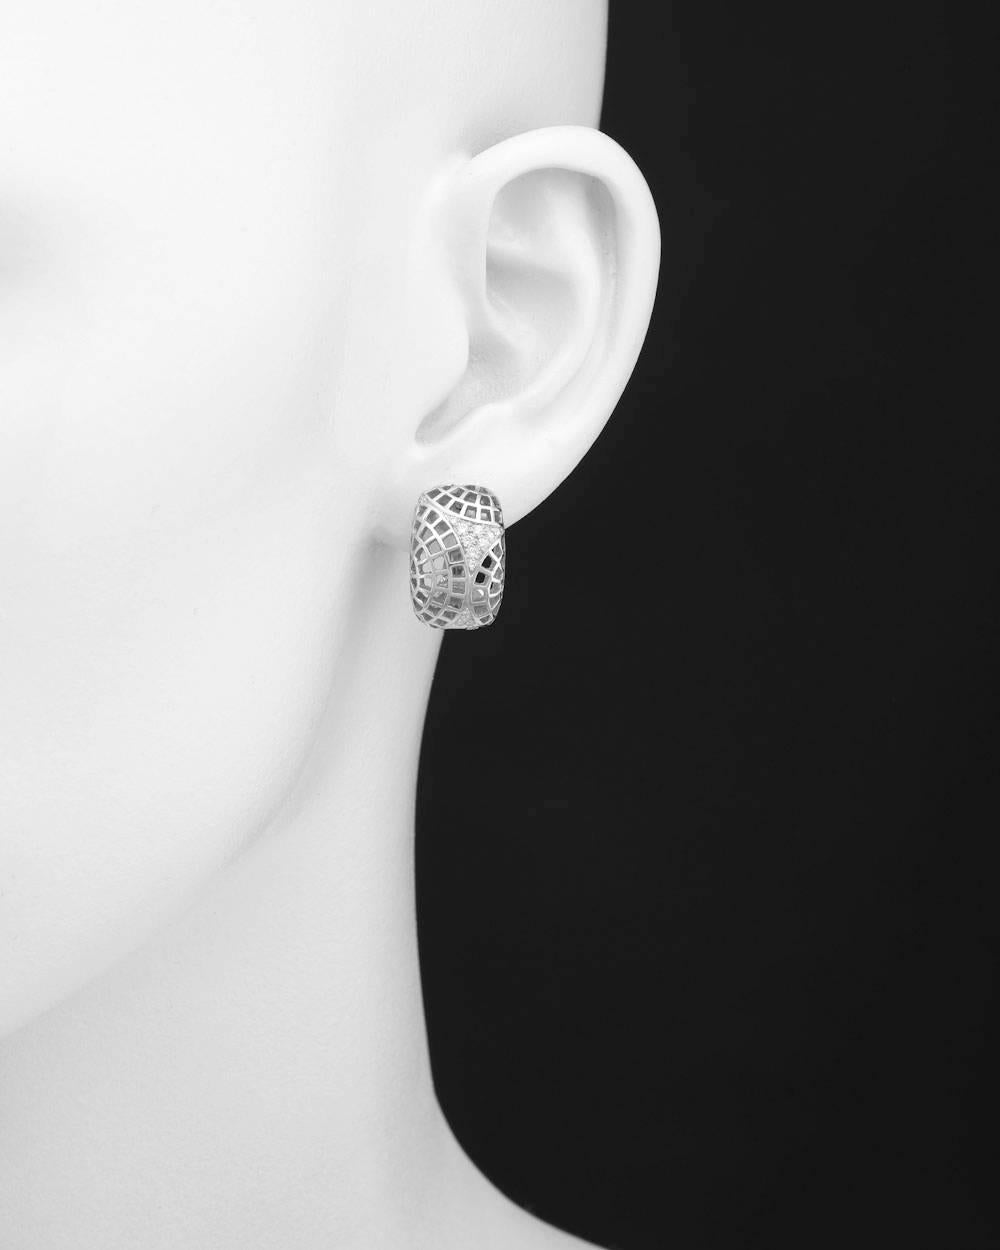 Filigree half-hoop earrings, accented by triangular-shaped pavé diamond sections at top and bottom, the diamonds weighing approximately 0.27 total carats (F-G color/VVS1-VVS2 clarity), in 18k white gold, with clips and post backs, numbered I23771,